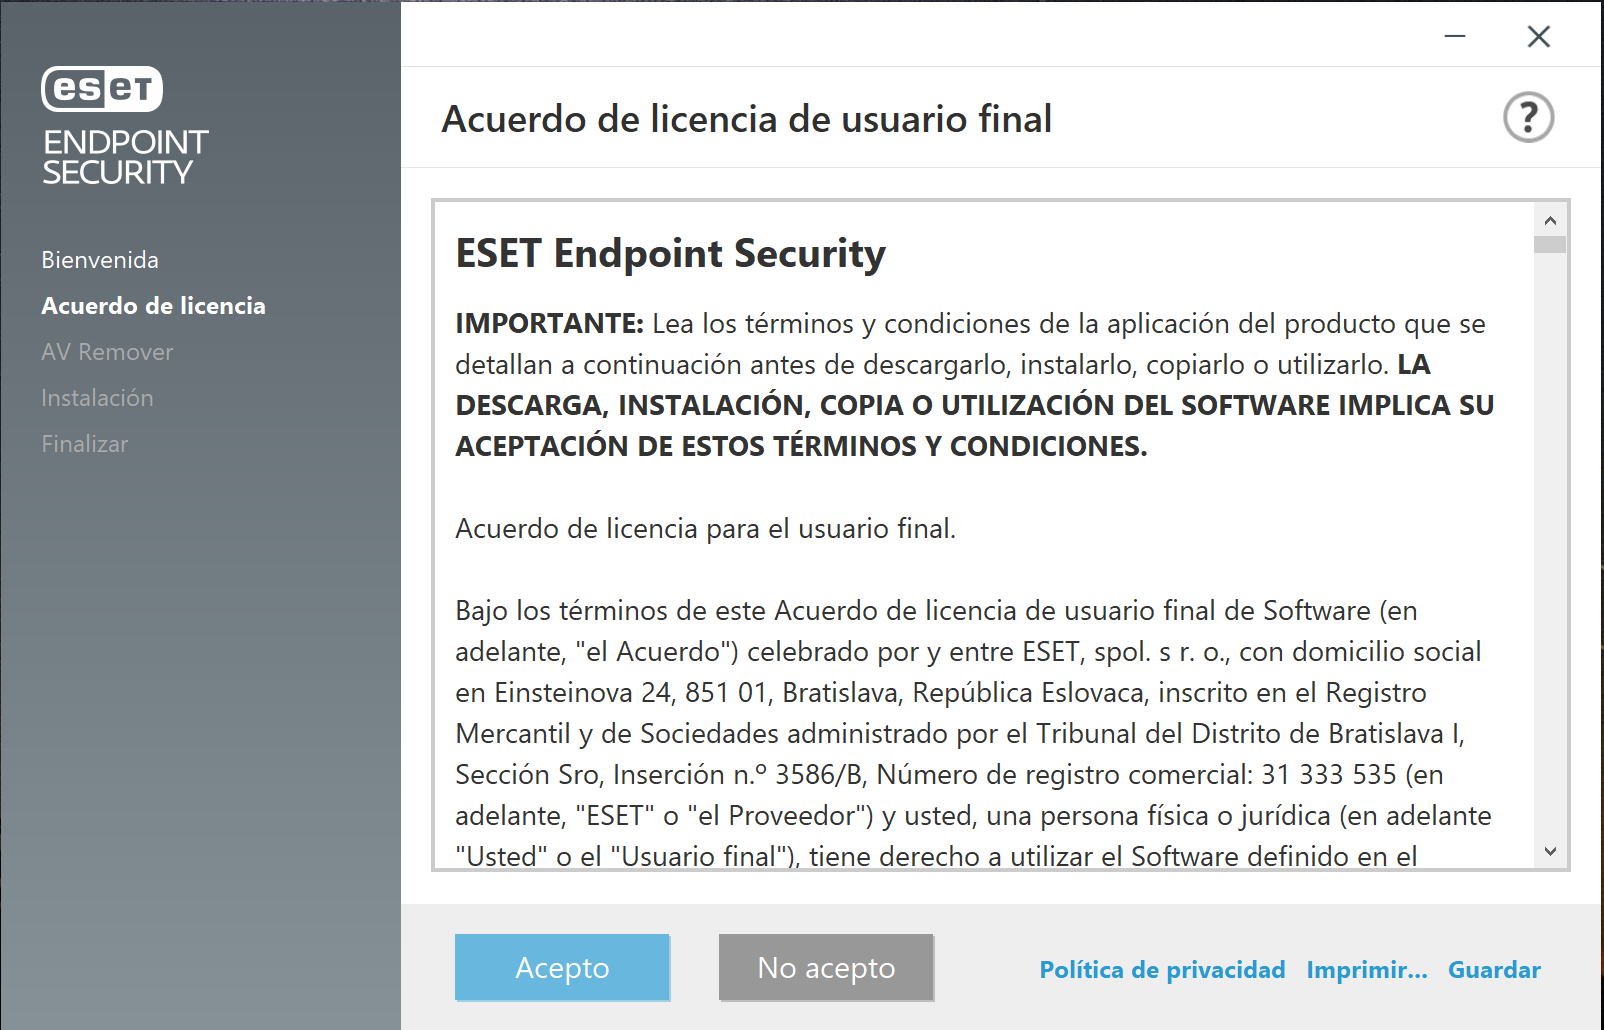 ESET Endpoint Security 10.1.2050.0 download the new version